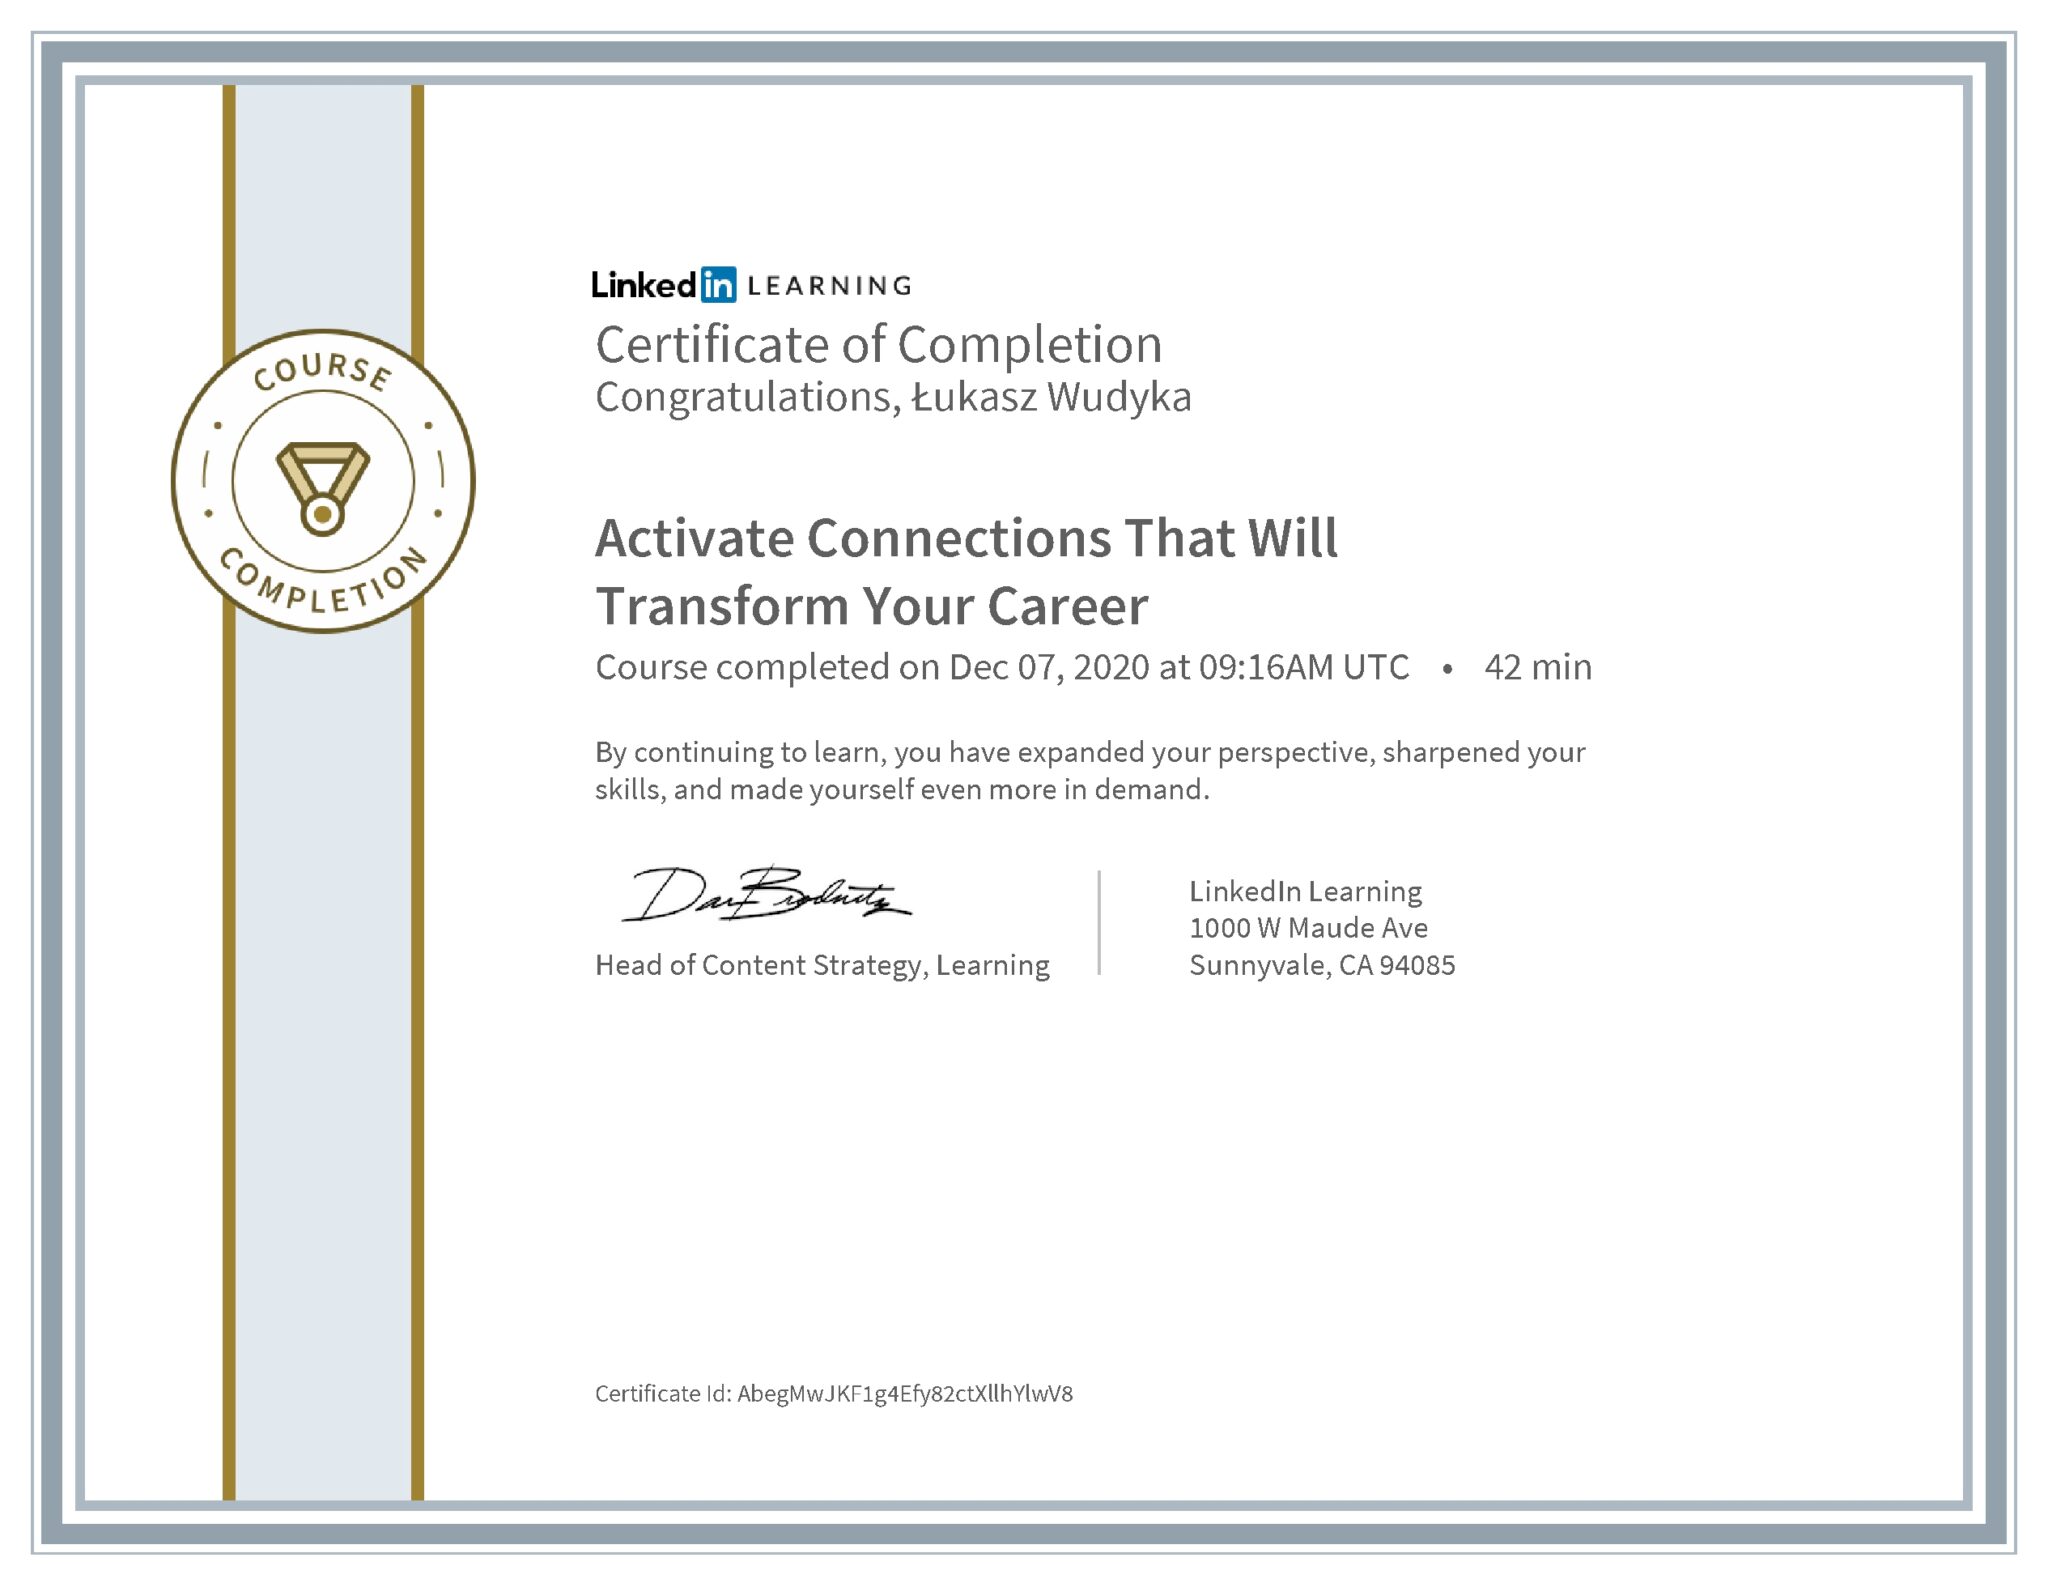 Łukasz Wudyka certyfikat LinkedIn Activate Connections That Will Transform Your Career